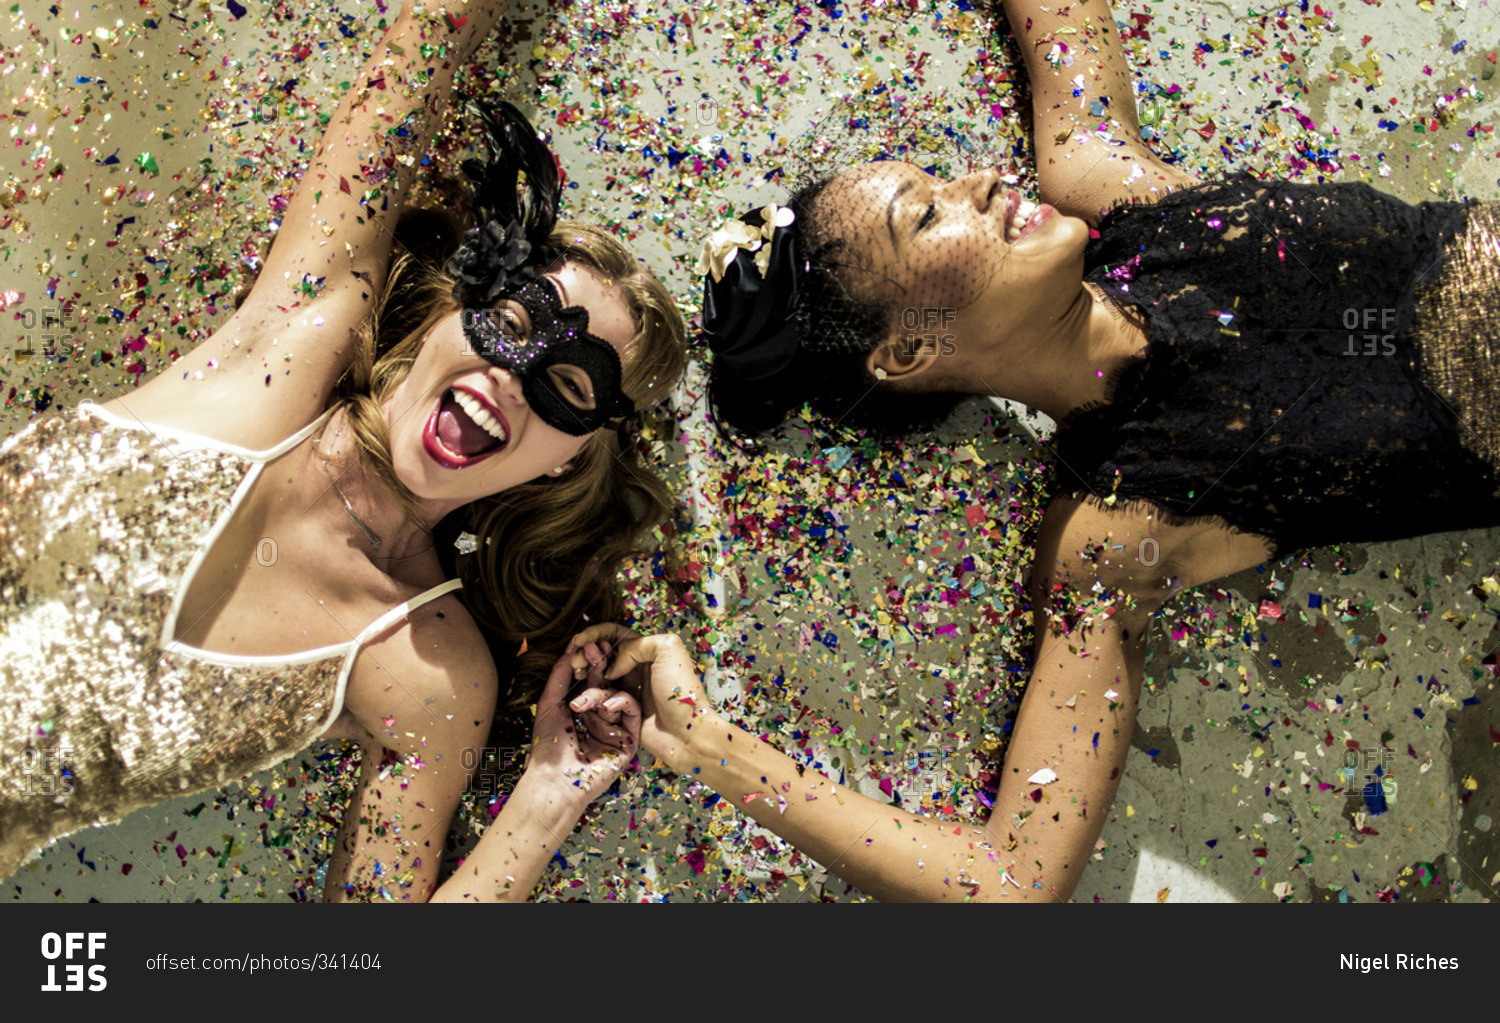 Friends lying together on a floor covered in confetti